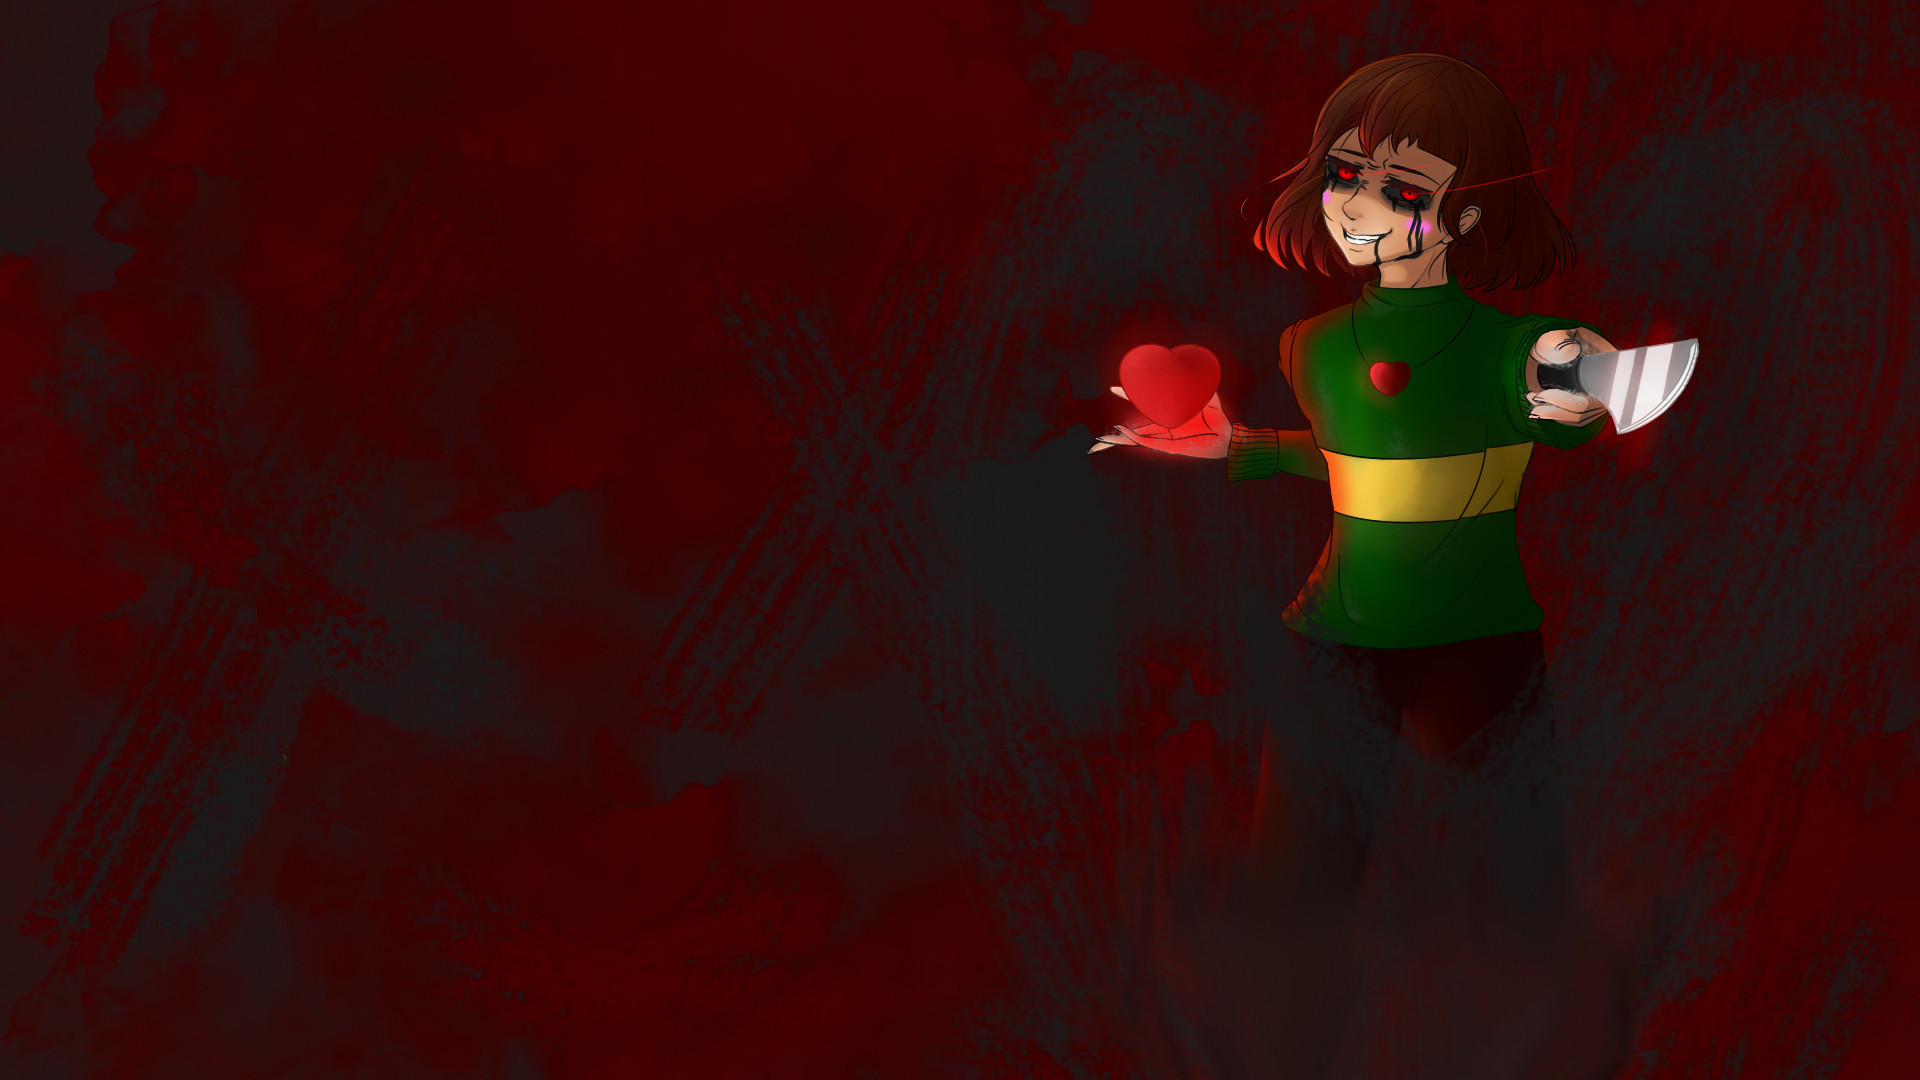 1920x1080 ... Chara - The World is Fading (Undertale Wallpaper) by DigitalCold